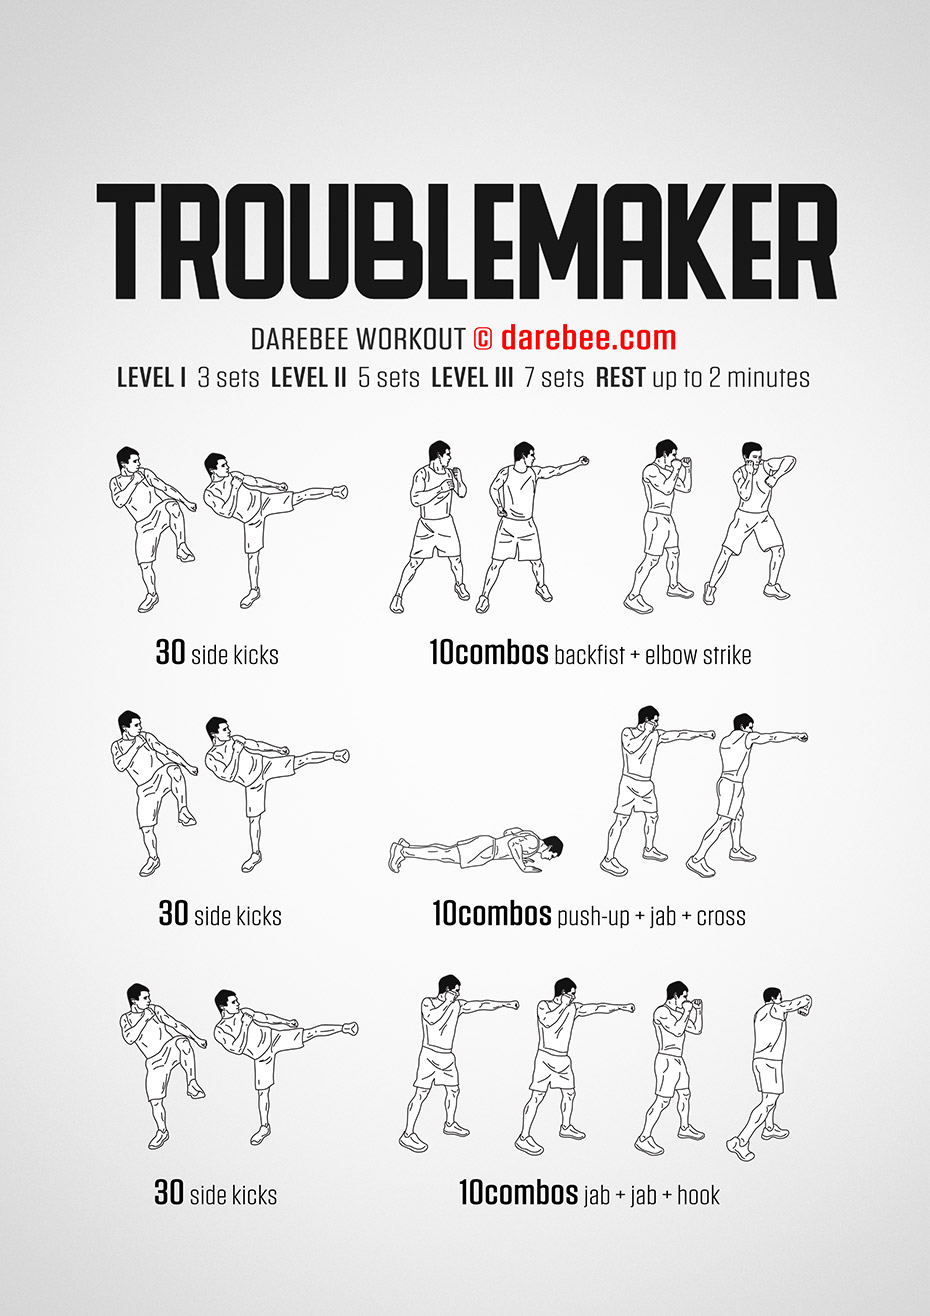 Troublemaker Workout